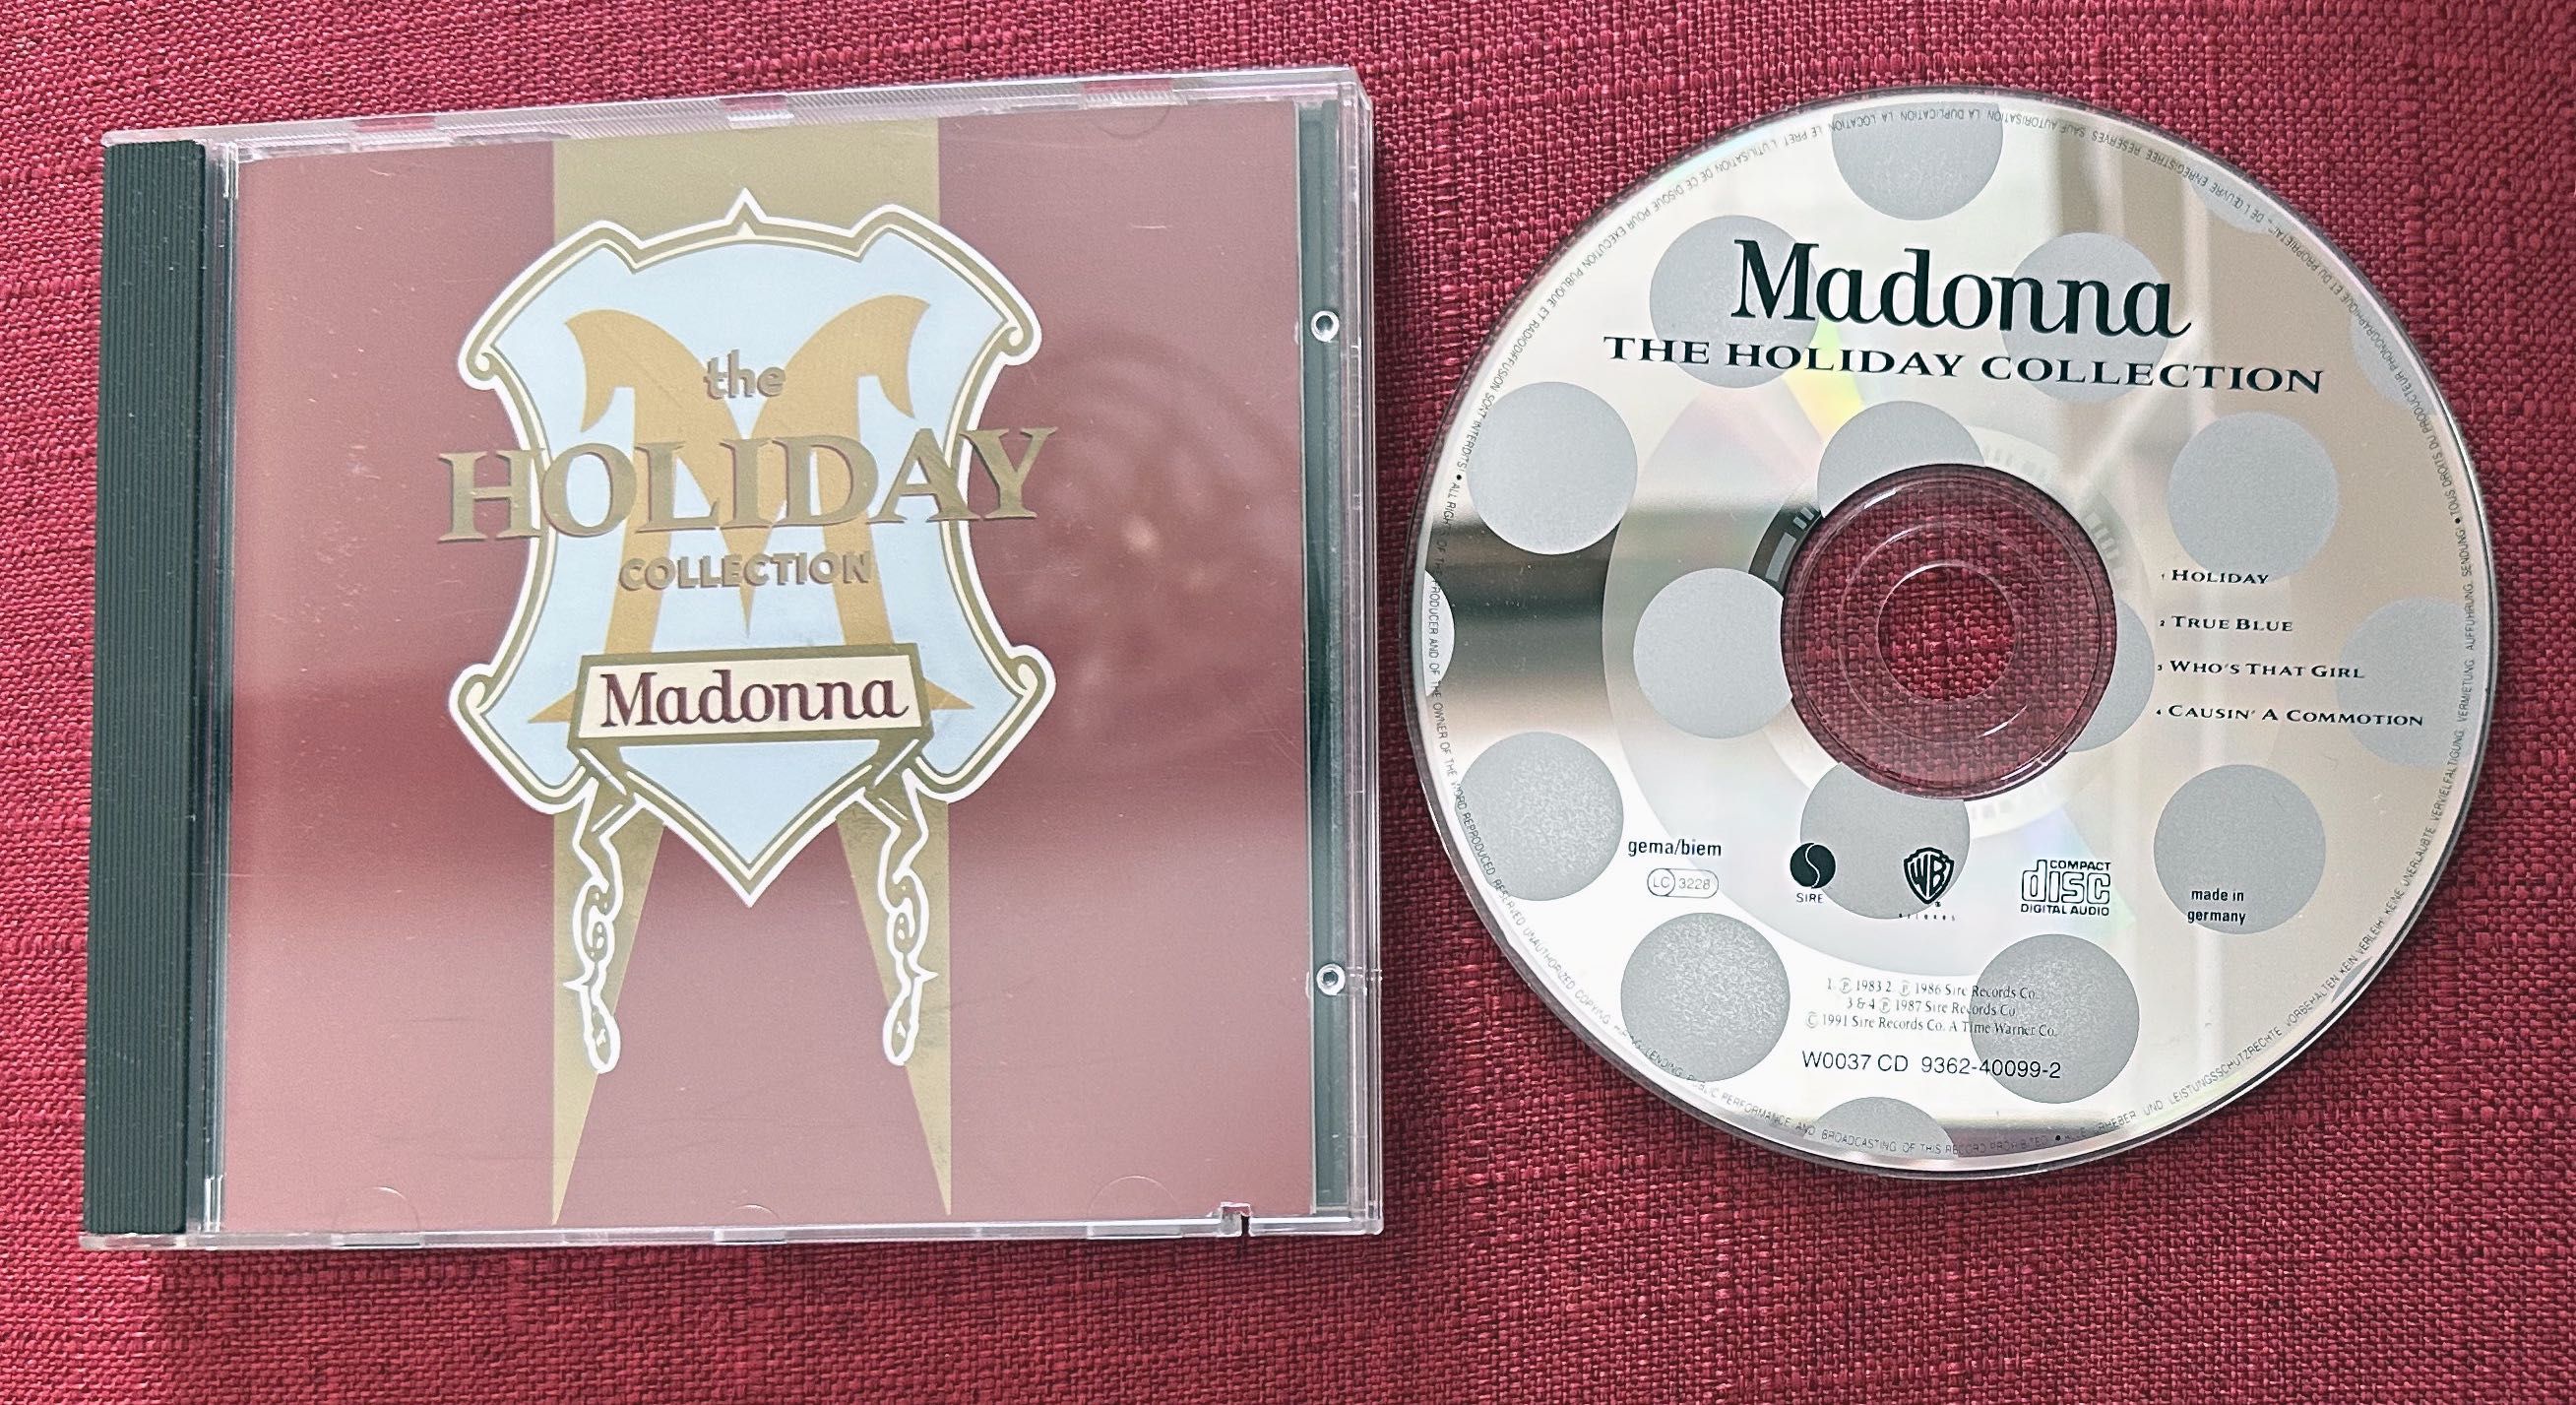 Madonna - The Holiday Collection - Cd EP - Germany